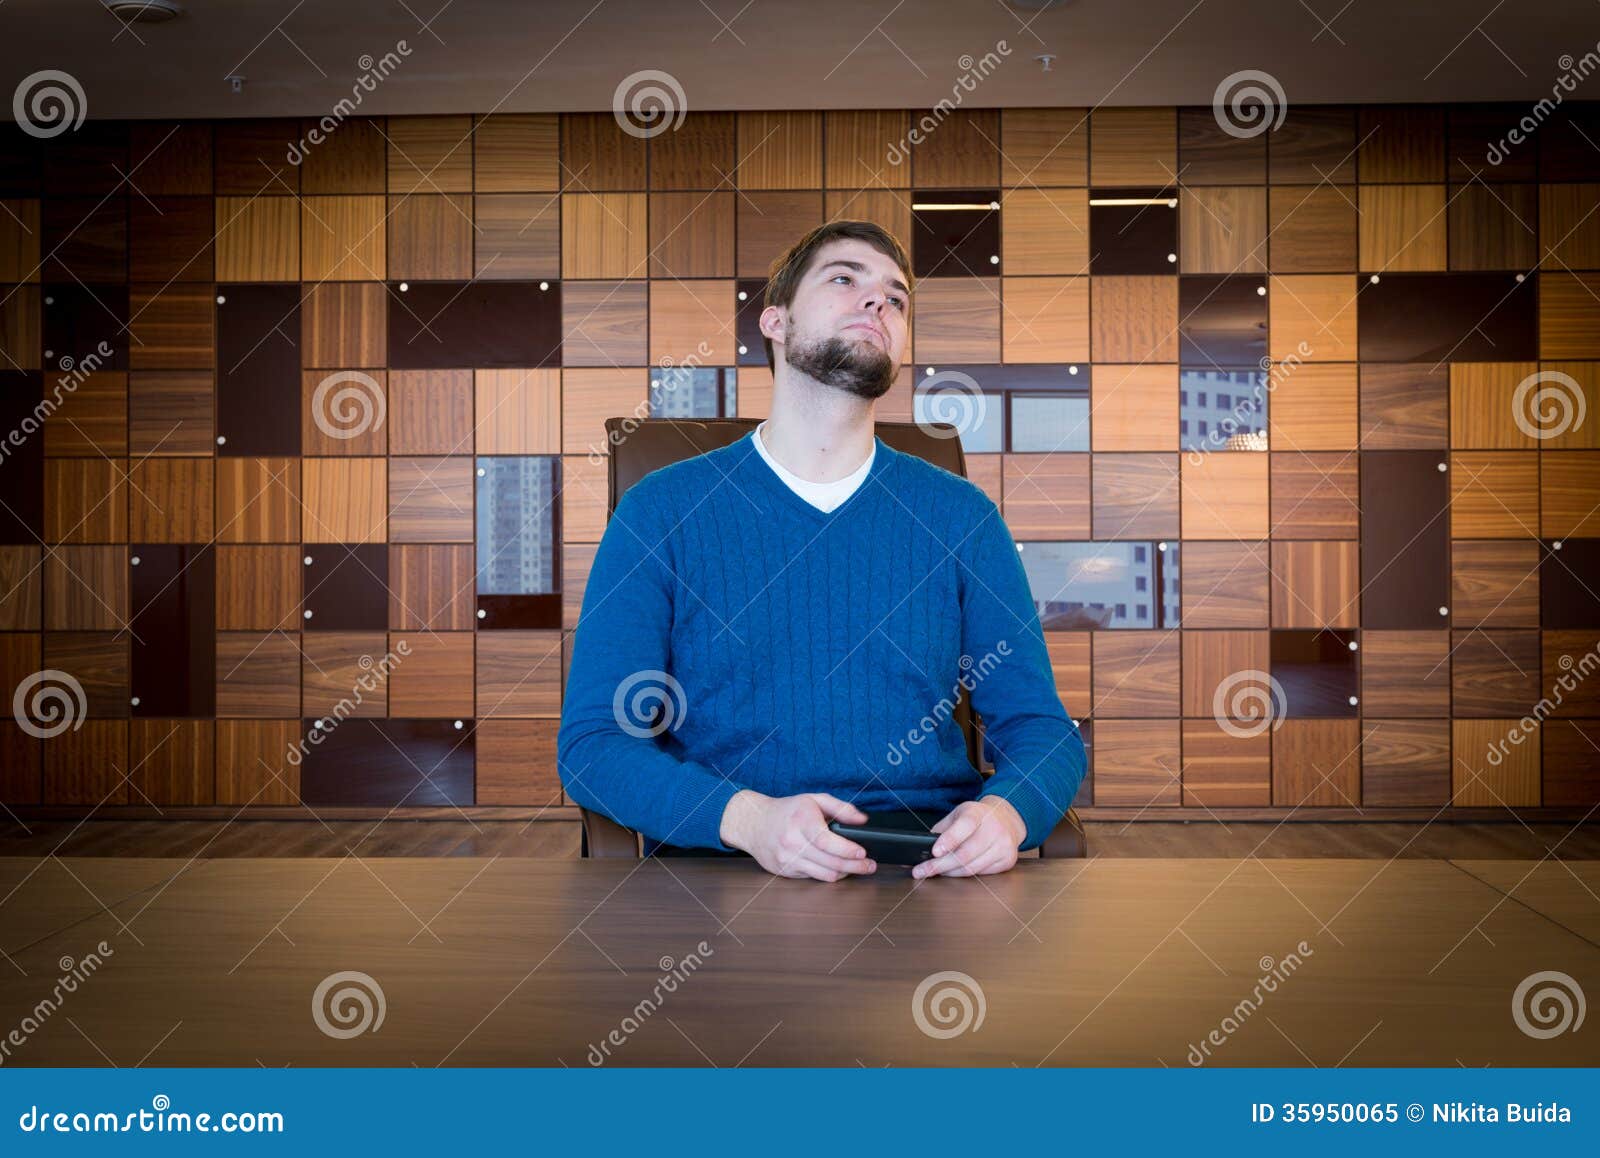 Bored To Death Stock Image Image Of People Executive 35950065